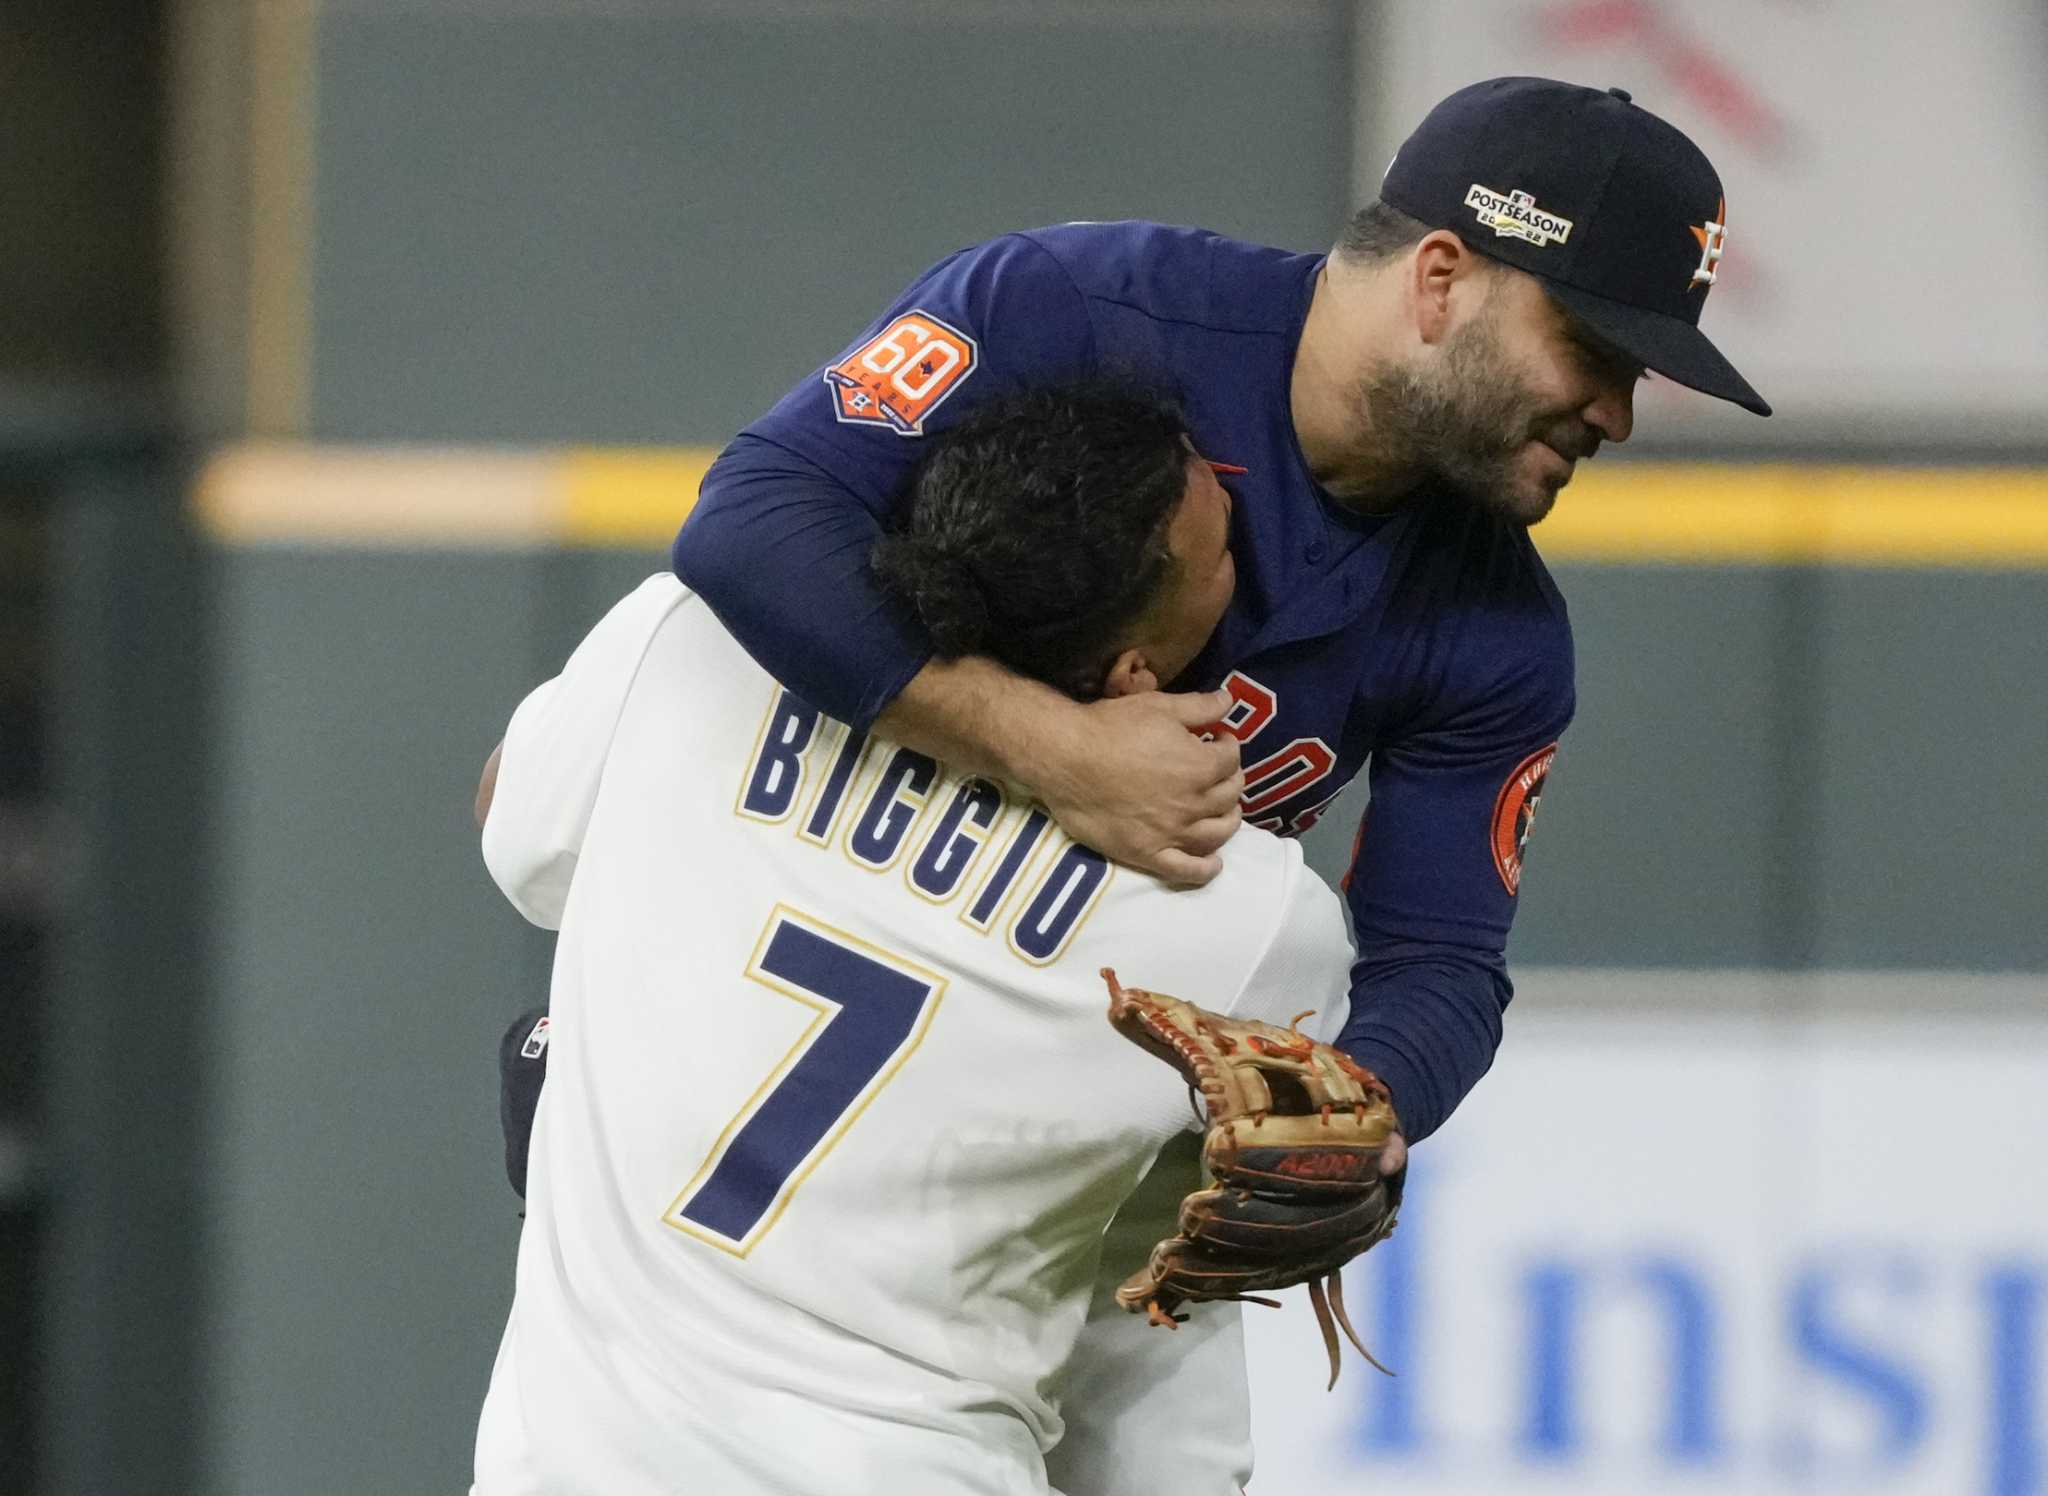 Houston Astros hero José Altuve hilariously hugs it out in viral